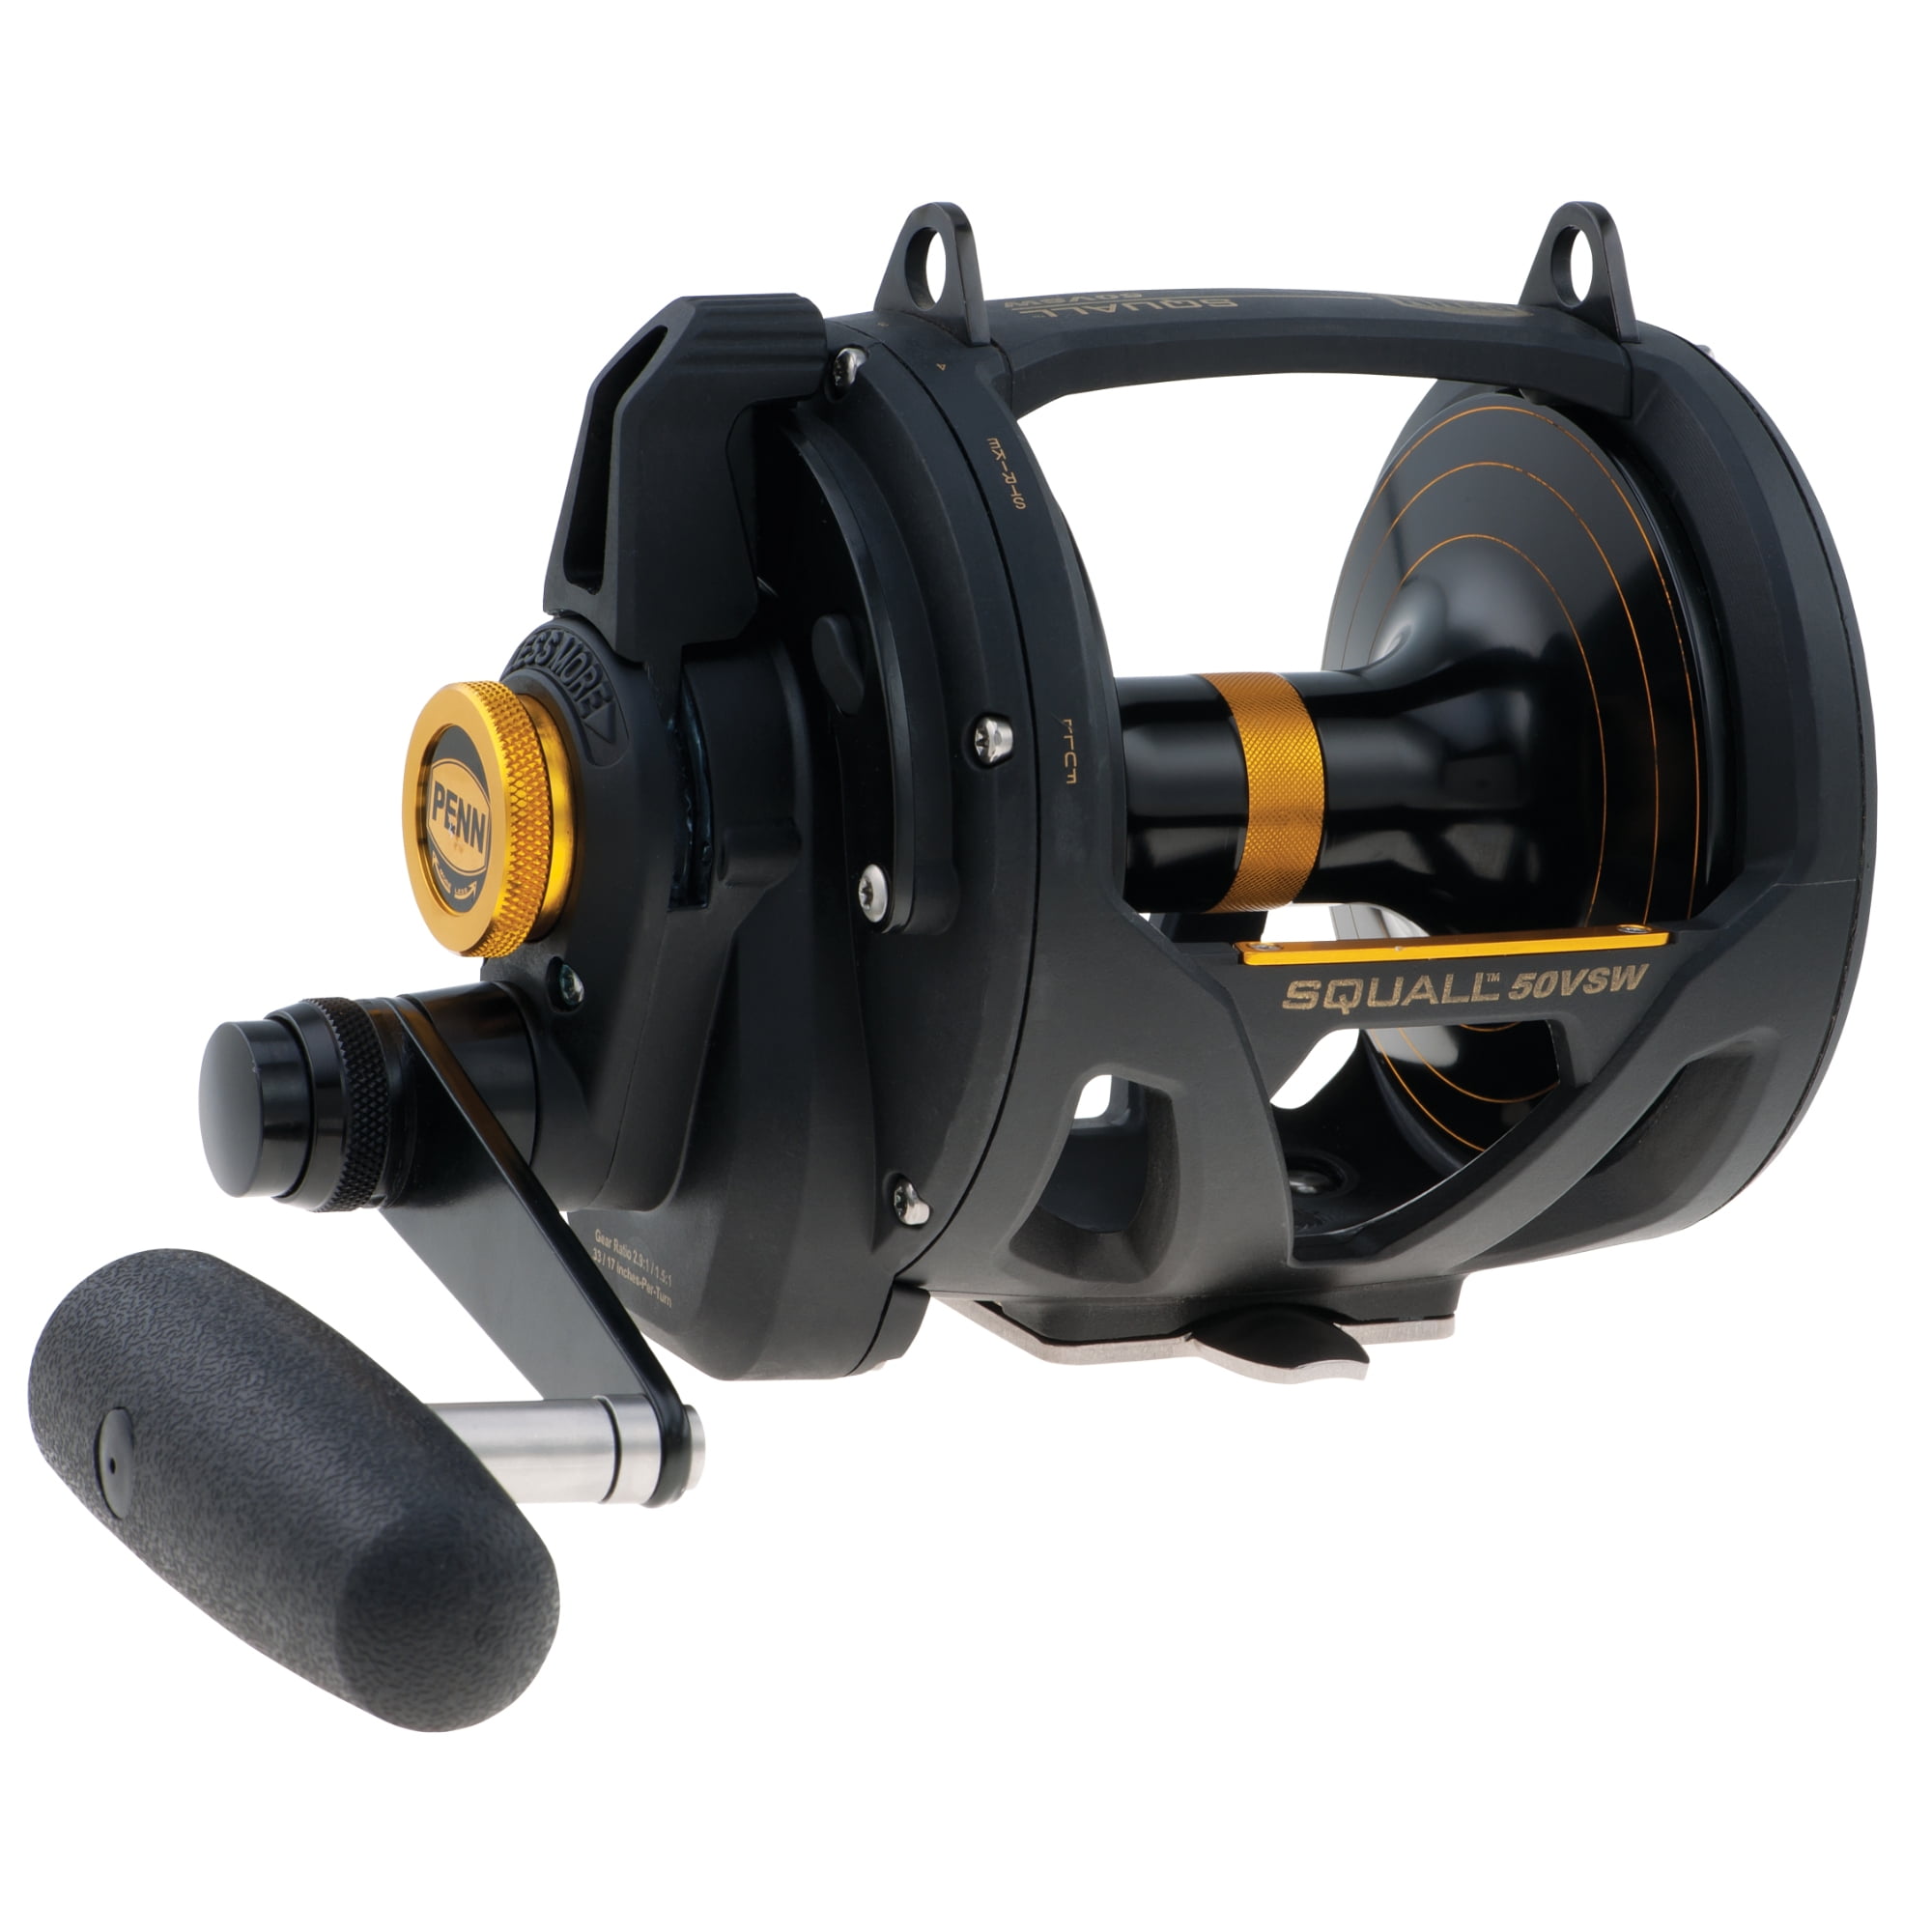 PENN Squall Lever Drag 2 Speed Conventional Reel, Size IGFA16